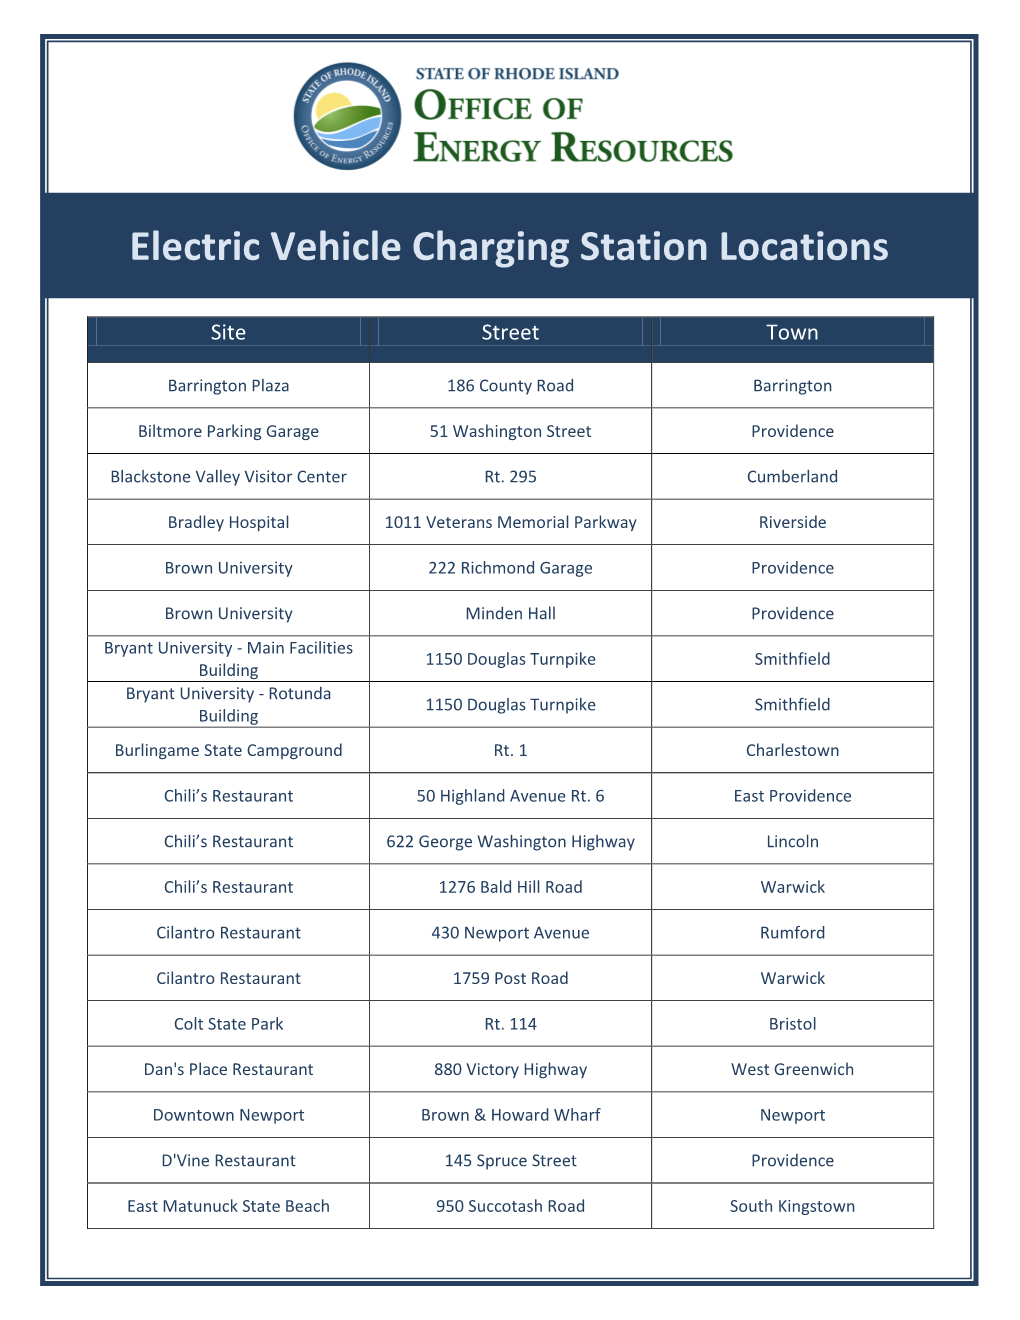 Electric Vehicle Charging Station Locations